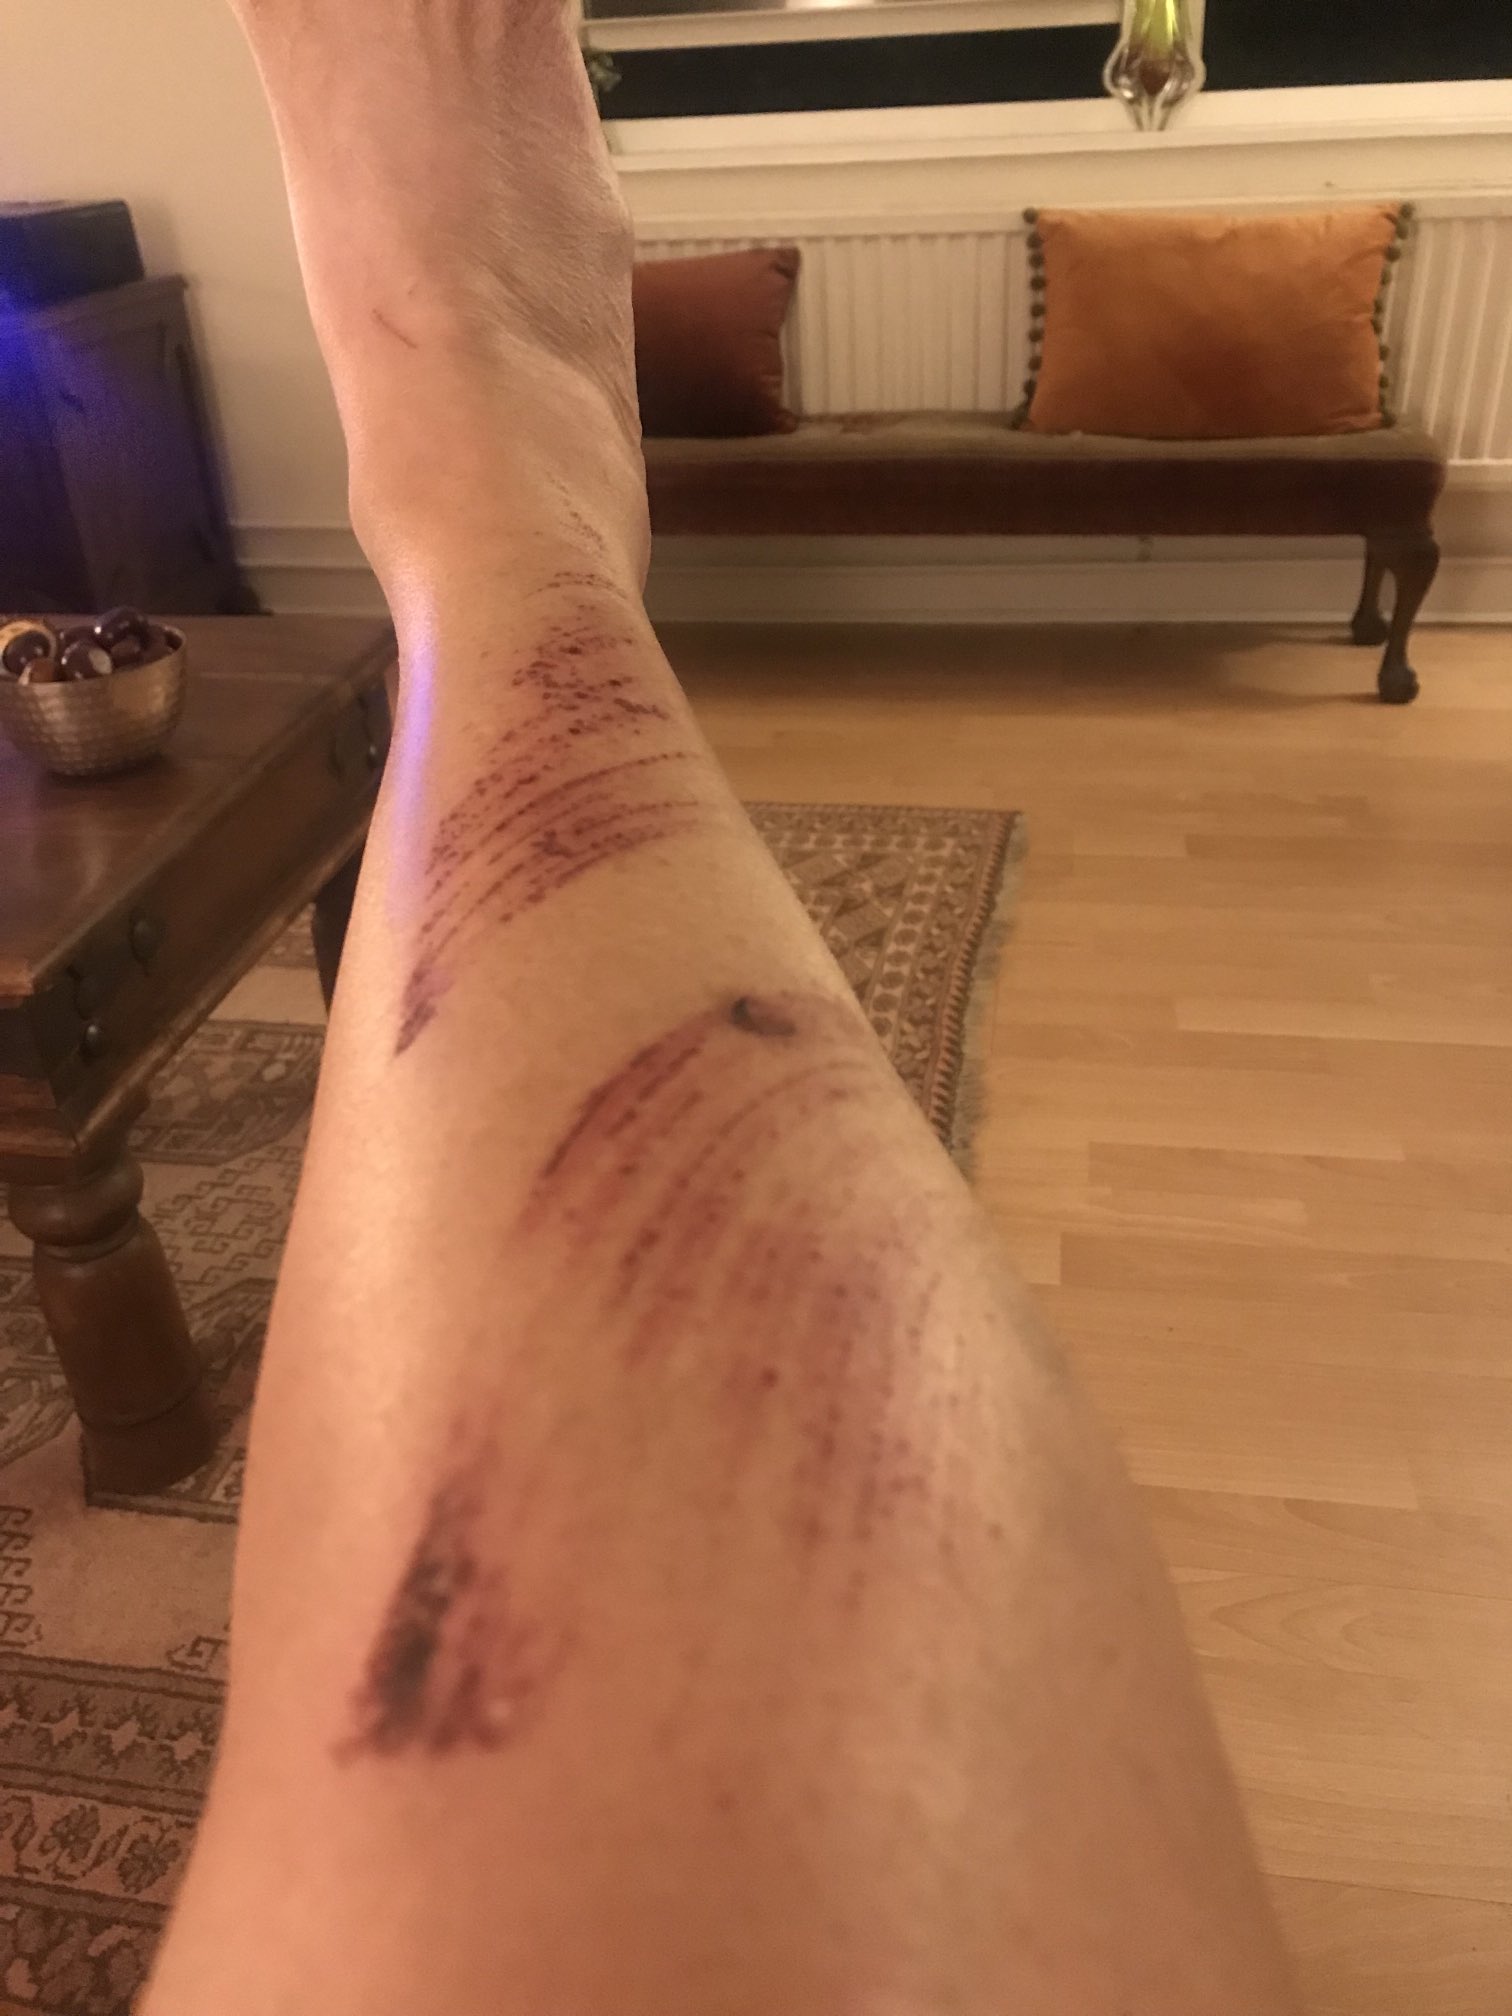 Louise Painedavey on X: Leg update. So sore. Bruise on back is